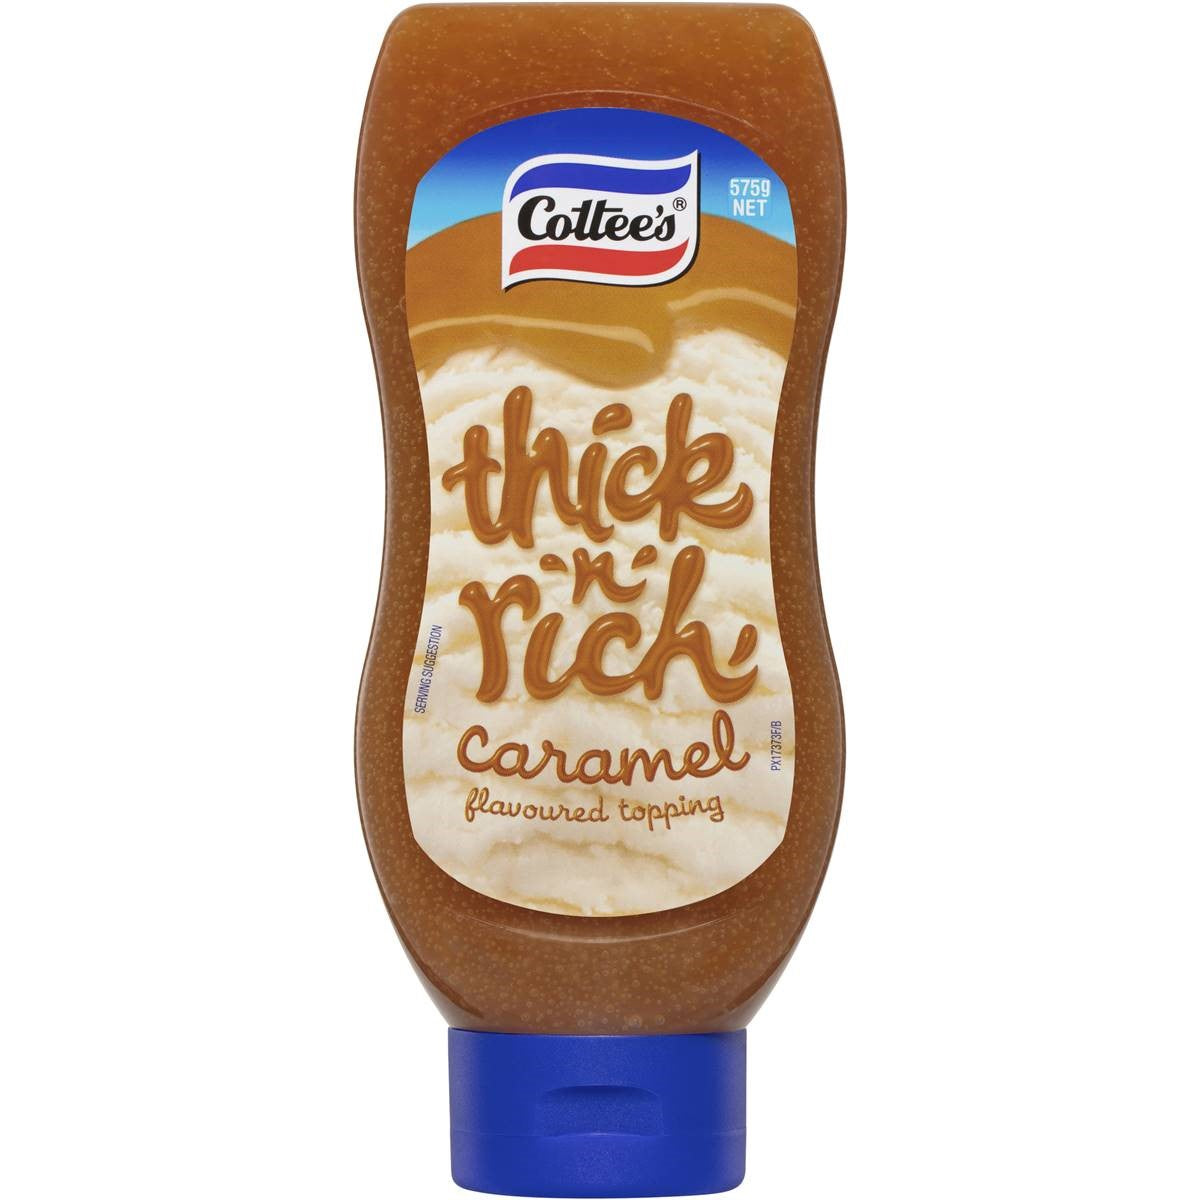 Cottees Thick'n'Rich Caramel Sauce 565g